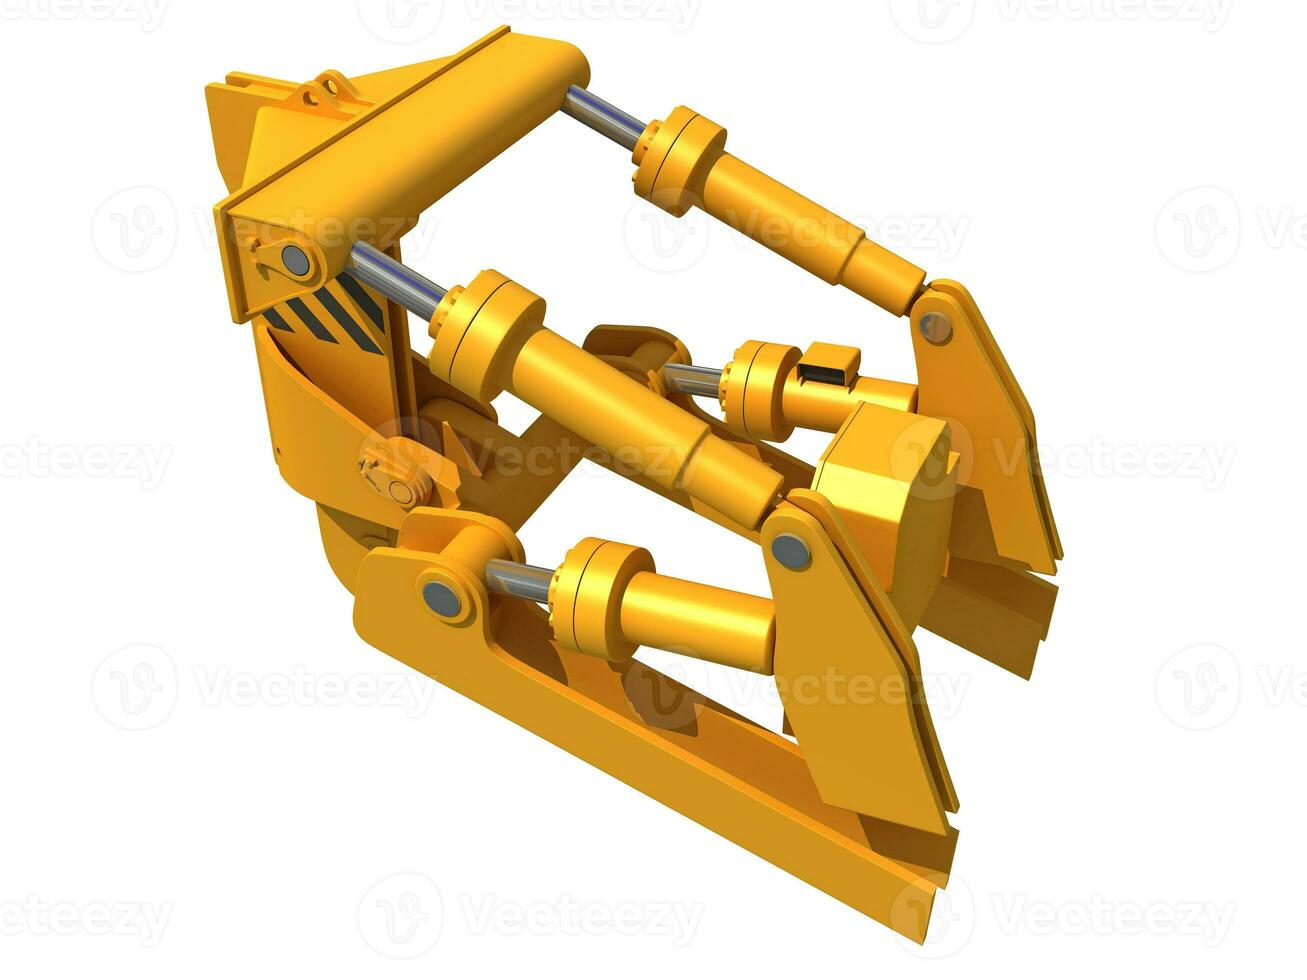 Excavator Fork Bucket heavy construction machinery 3D rendering on white background photo